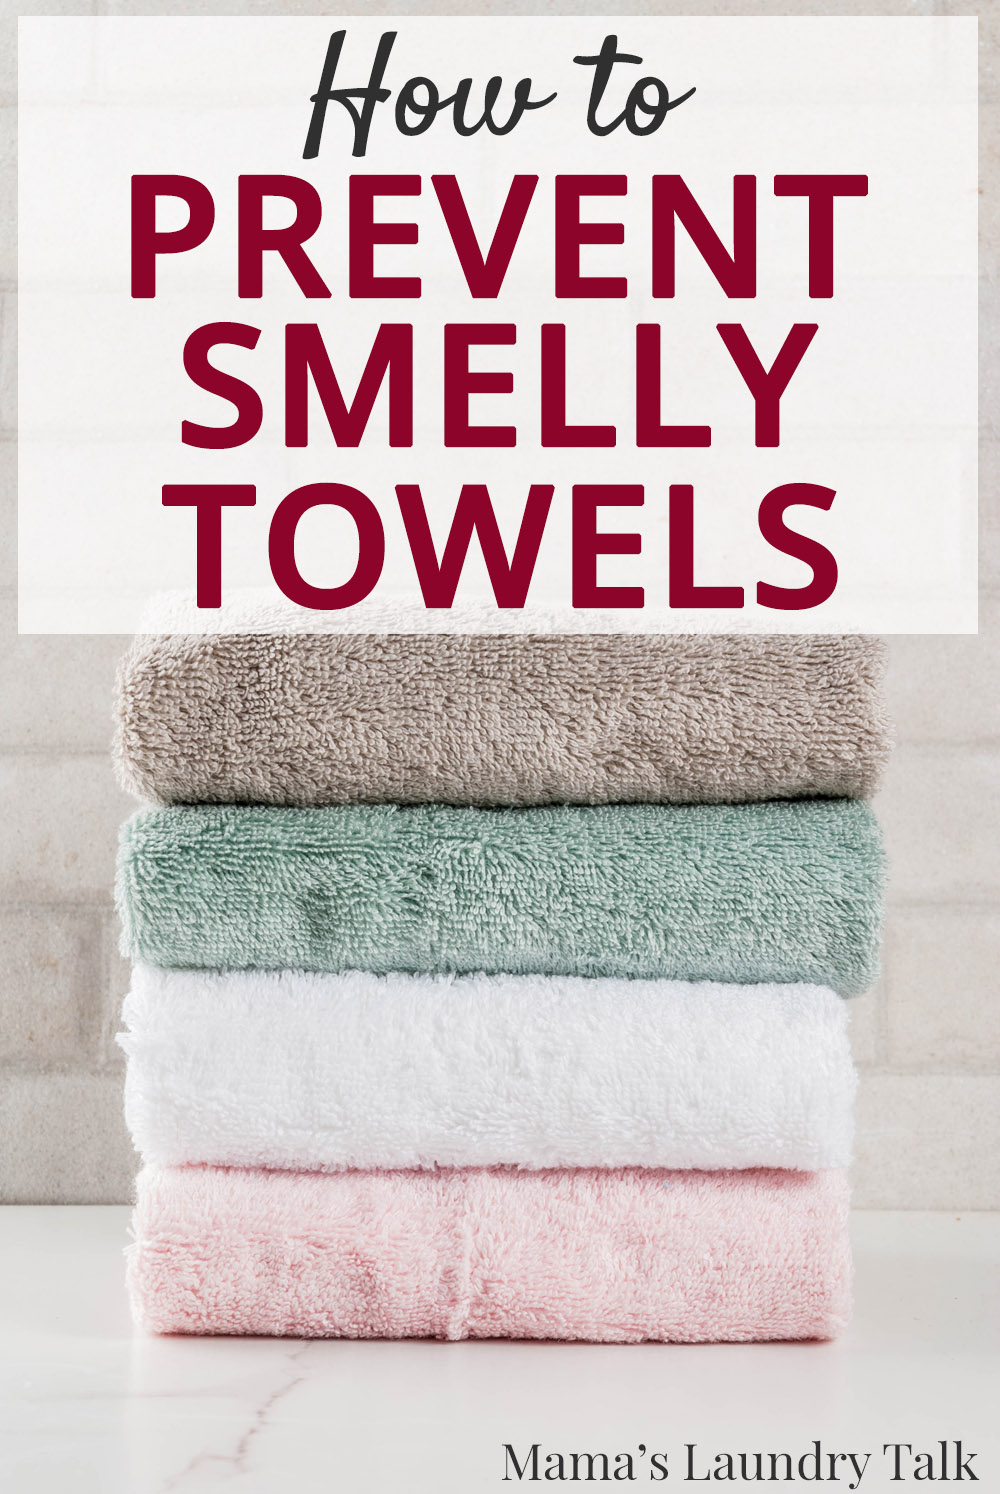 wet towels that keep you cool